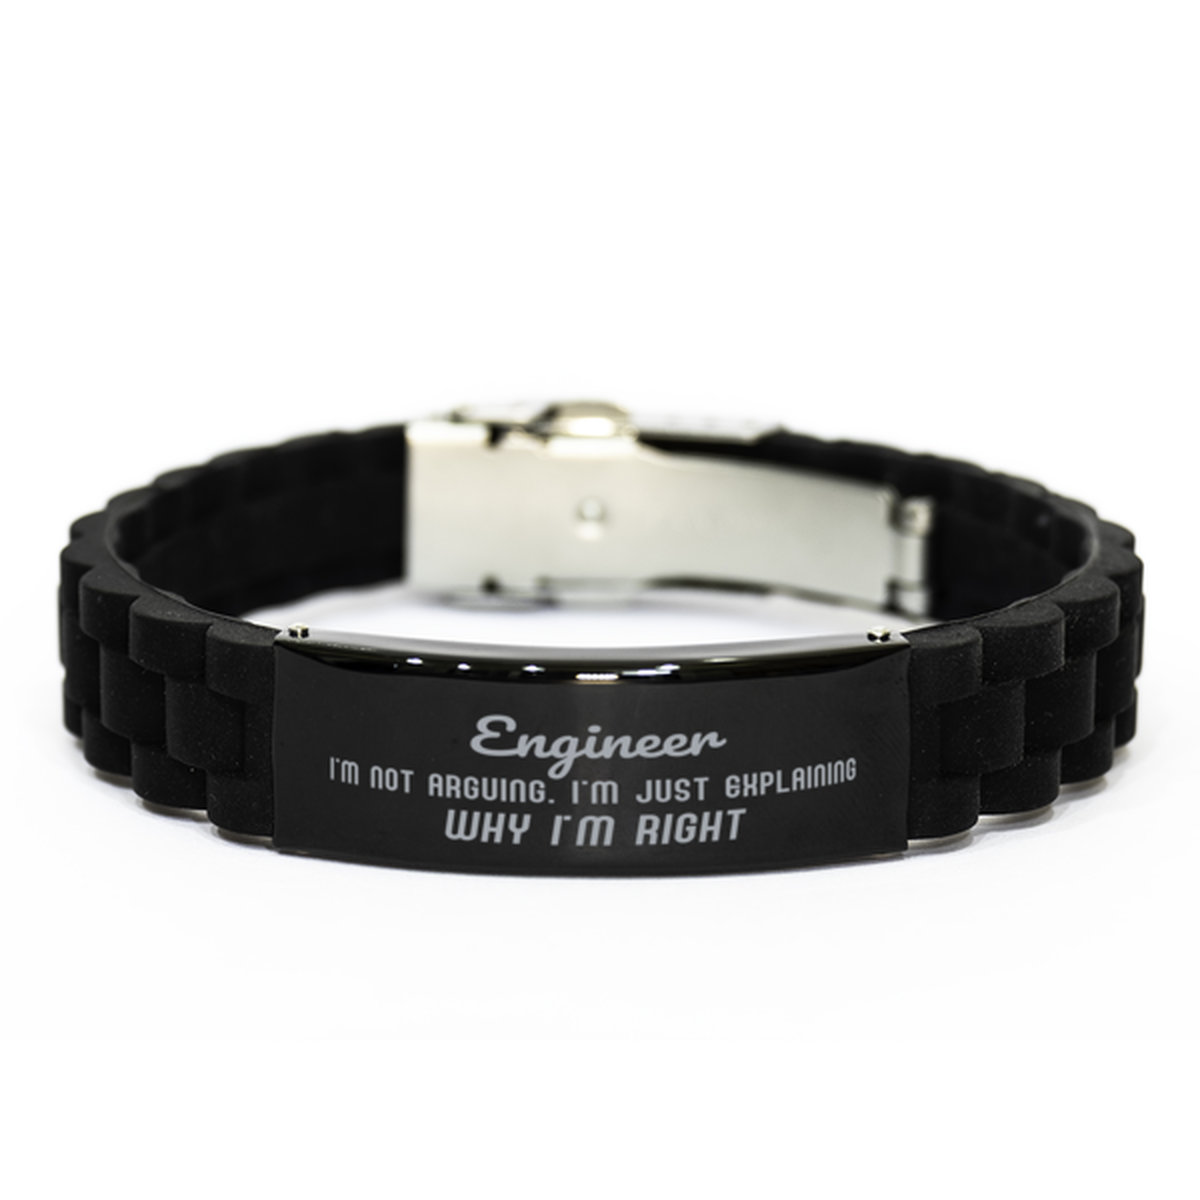 Engineer I'm not Arguing. I'm Just Explaining Why I'm RIGHT Black Glidelock Clasp Bracelet, Funny Saying Quote Engineer Gifts For Engineer Graduation Birthday Christmas Gifts for Men Women Coworker